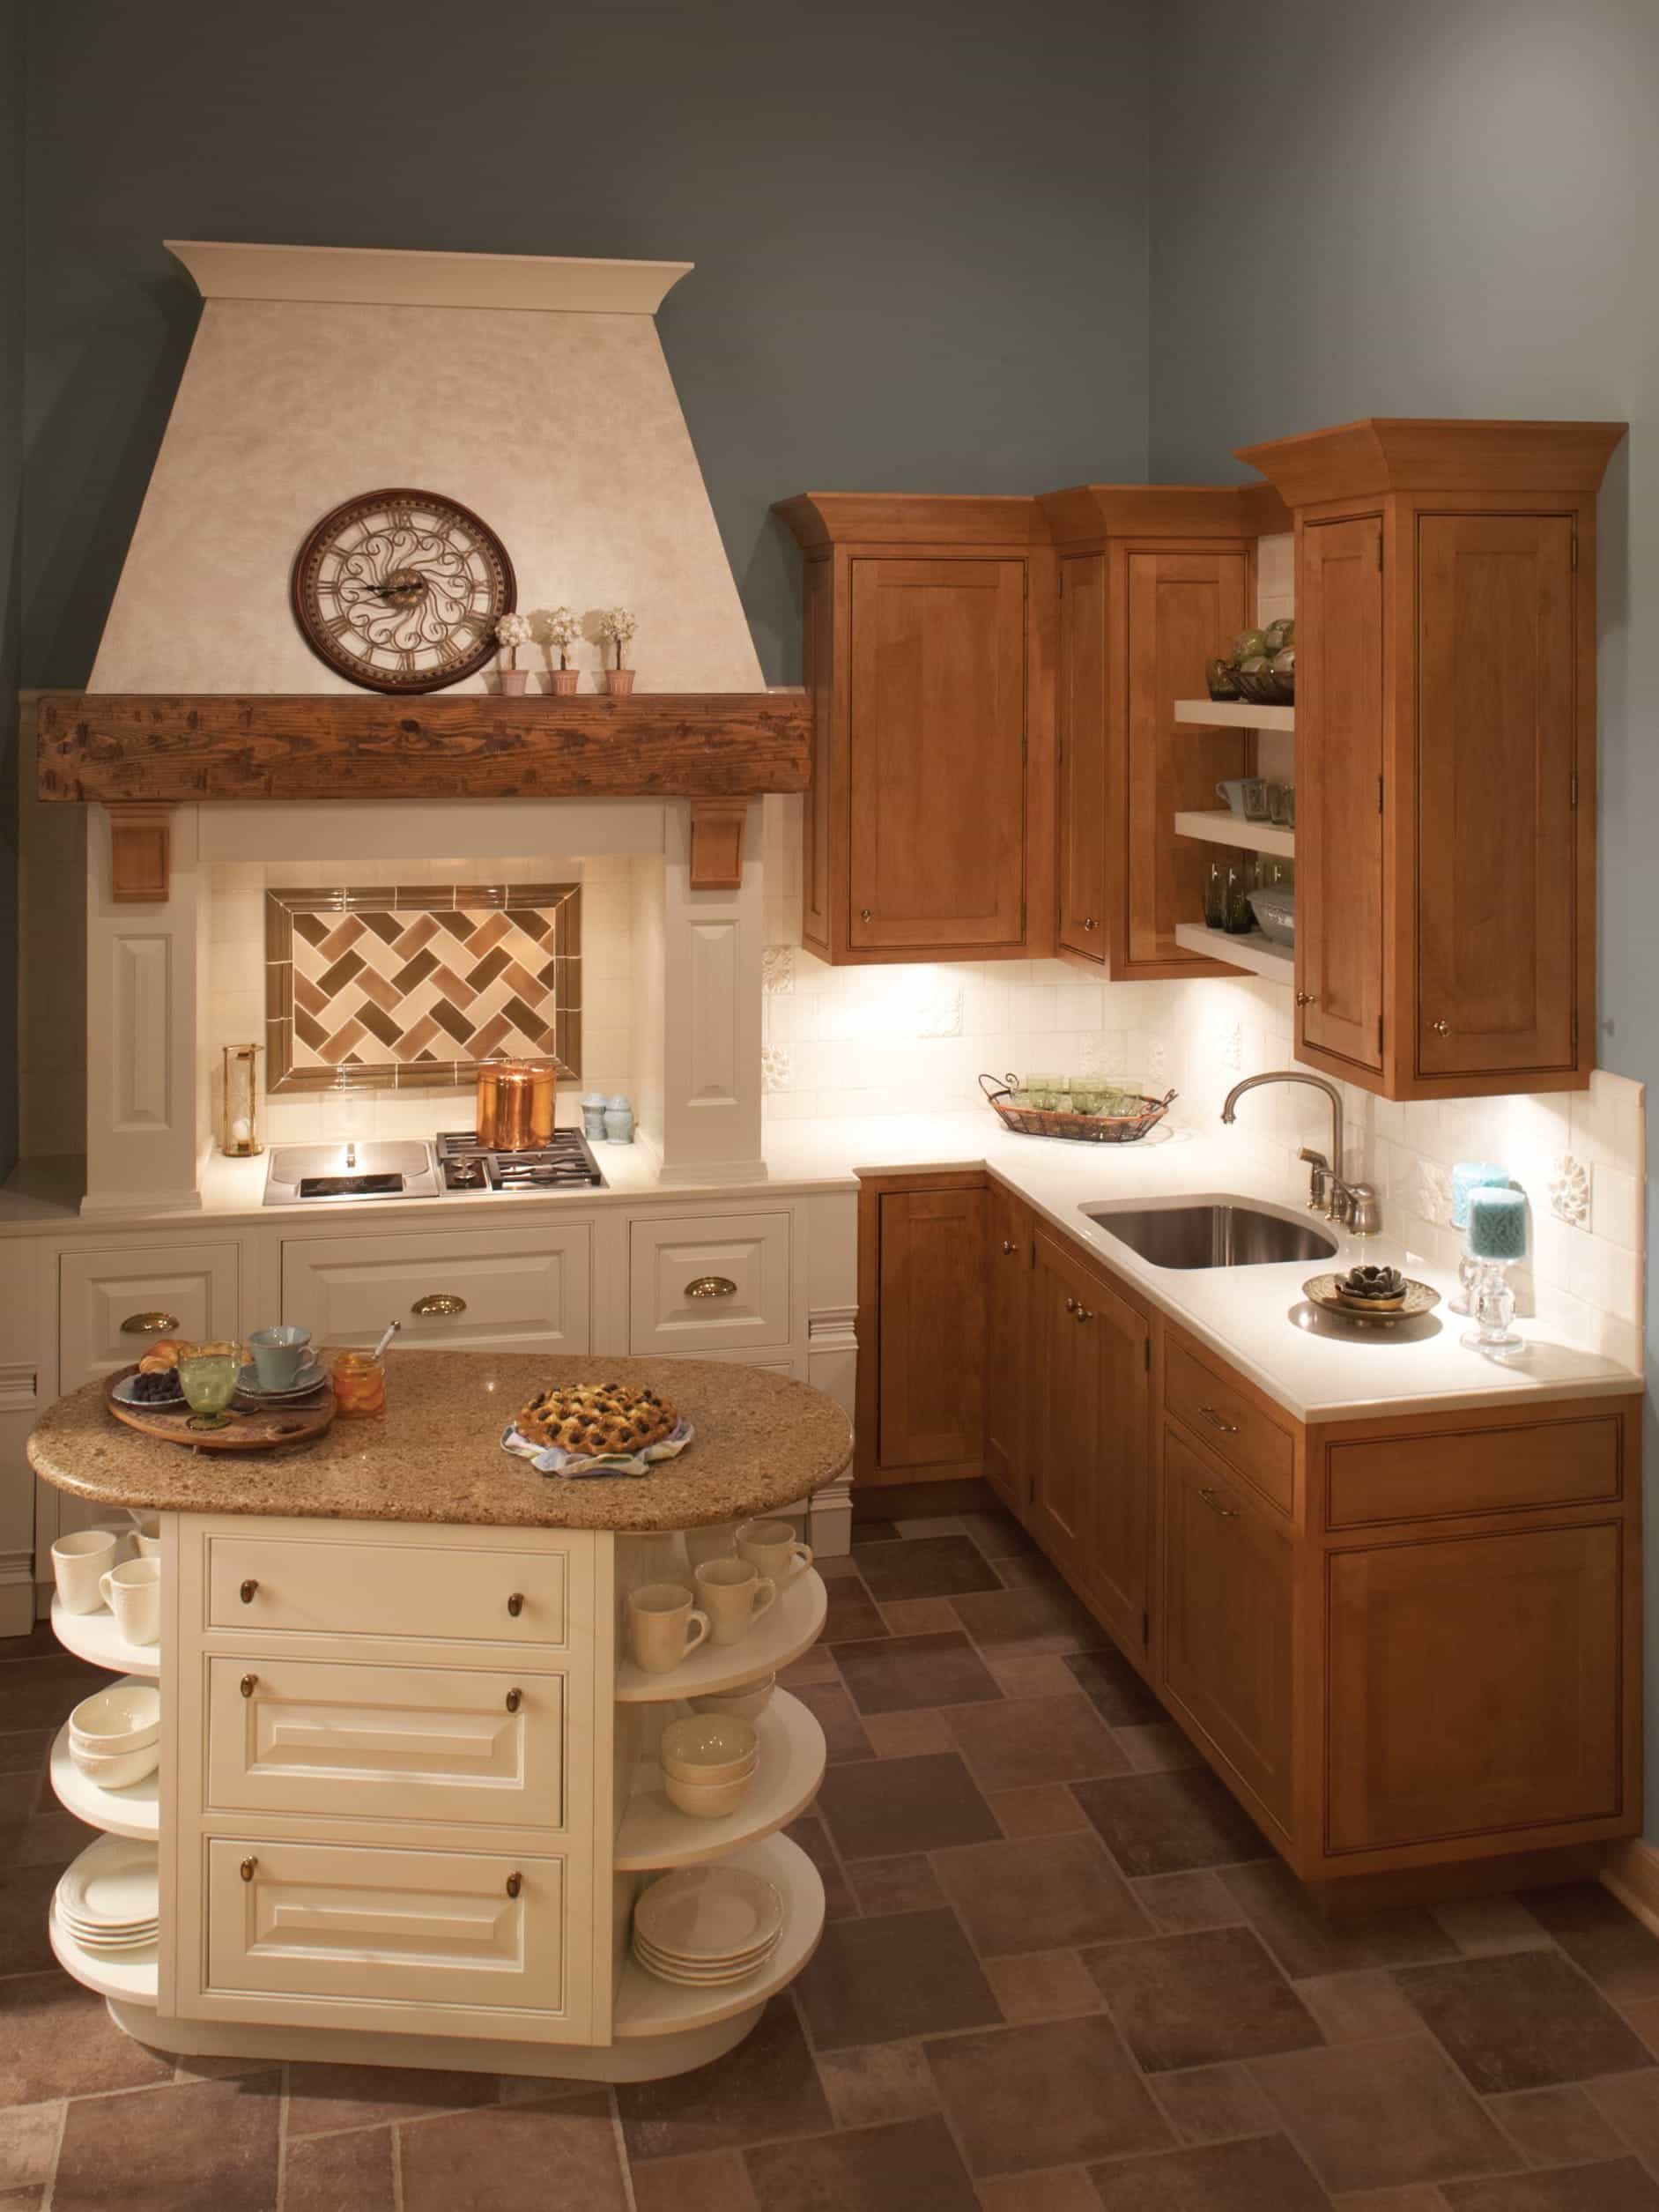 Gray Southwestern Kitchen Cabinets With A Small Center Island (View 7 of 26)